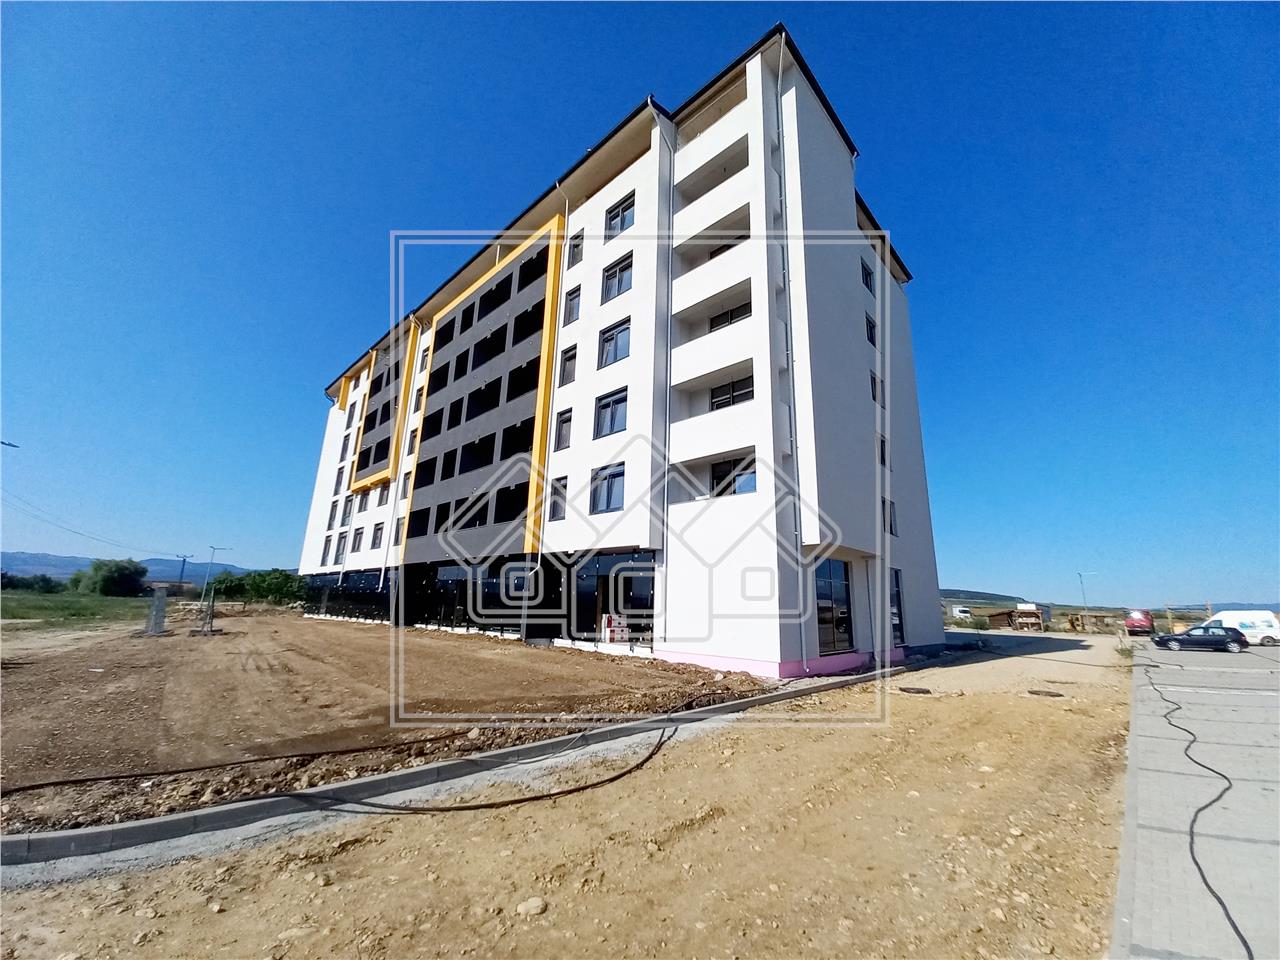 Residential complex of new apartments in Sebes - Alba Iulia